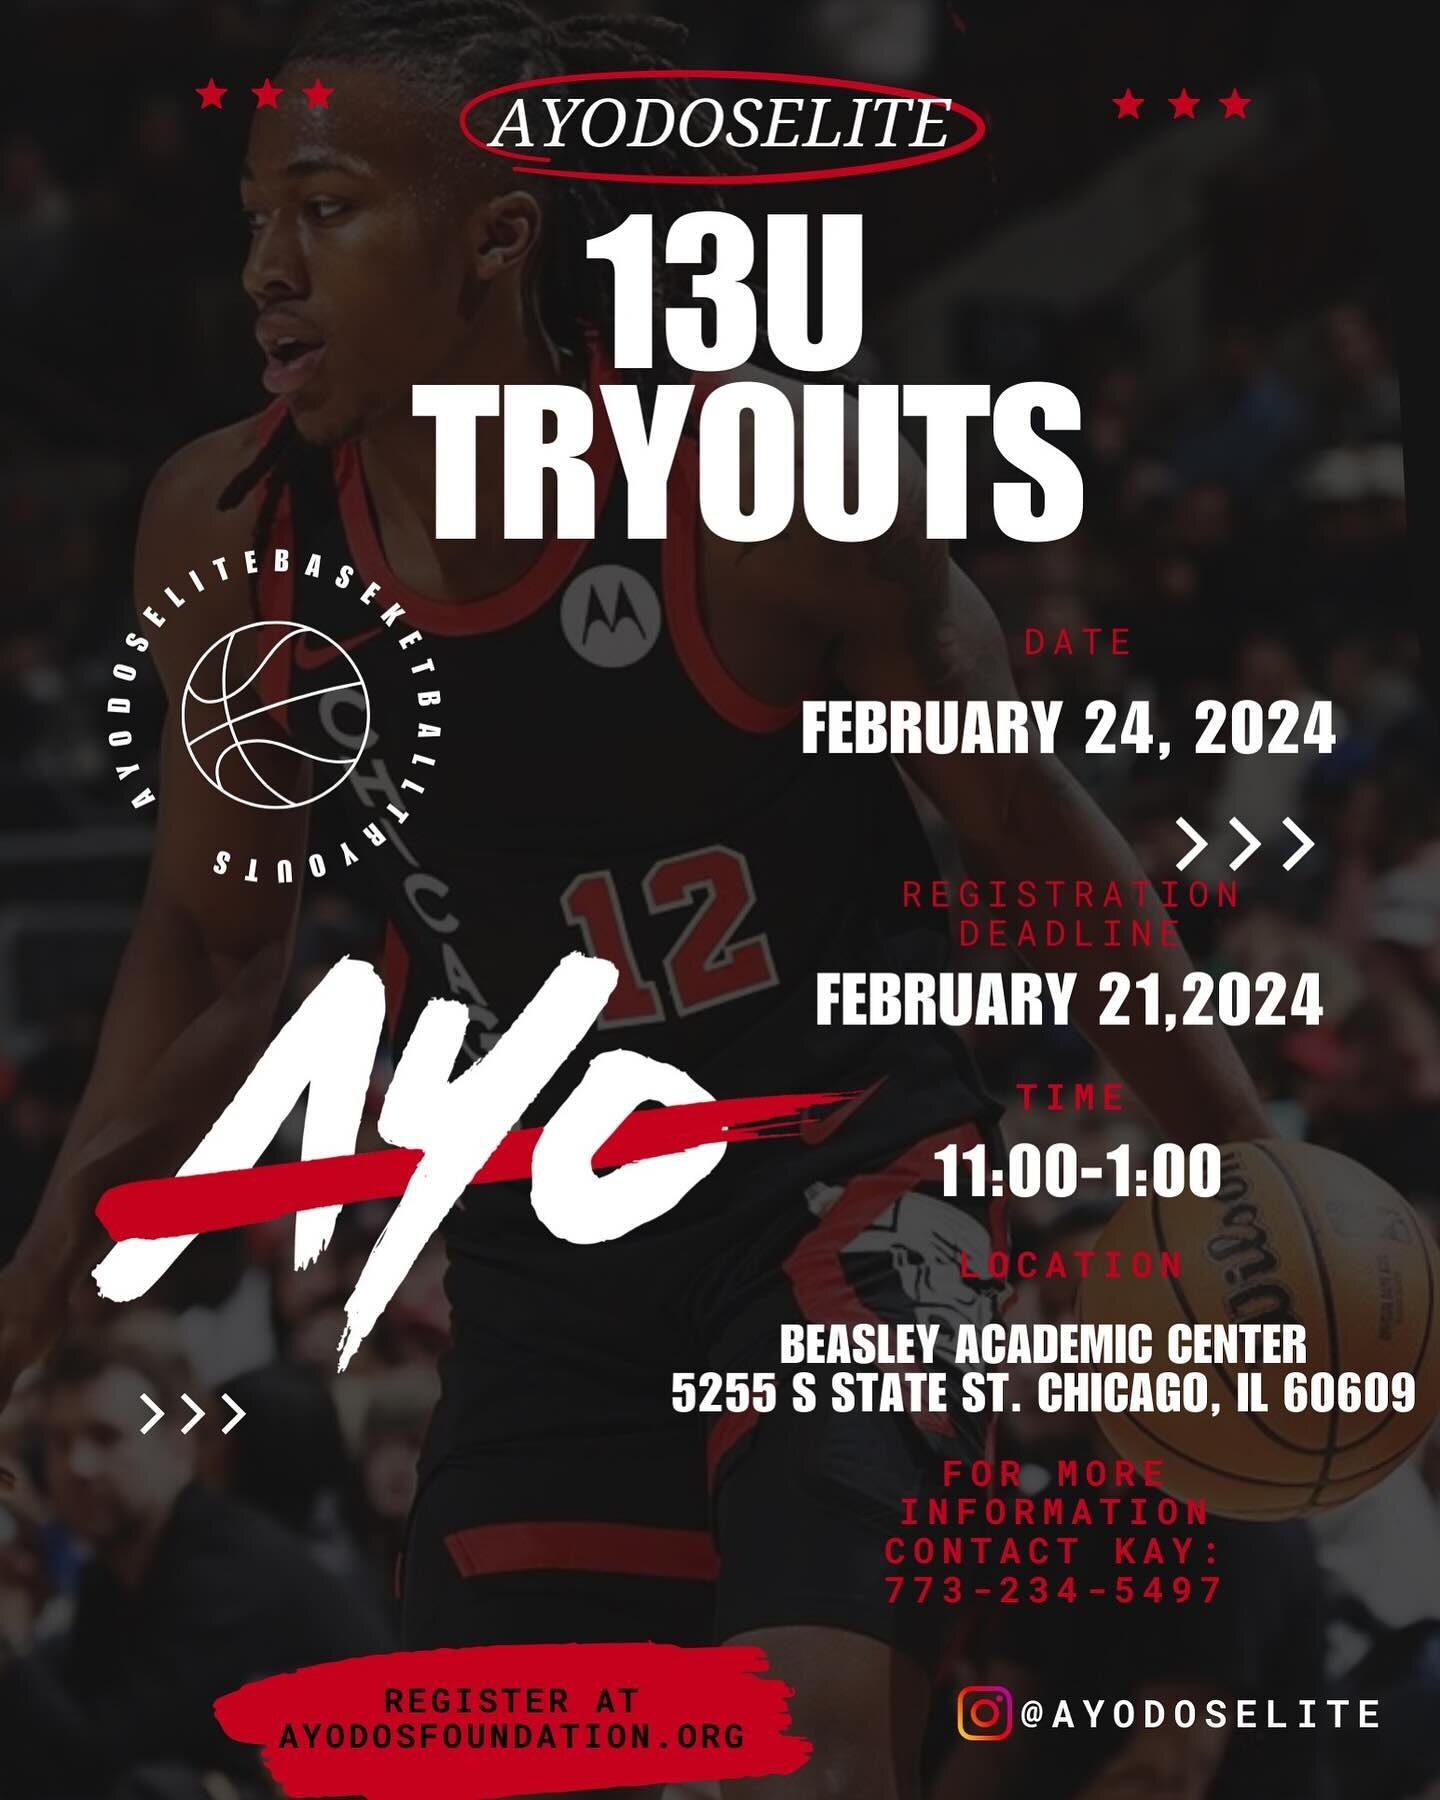 Hey 13U Ballers,
Get ready to hit the court because the Ayo Dos Elite 13U tryout is just around the corner! We told you that you were next, and here&rsquo;s your chance to shine.

We want each one of you to bring your A-game, passion, and determinati